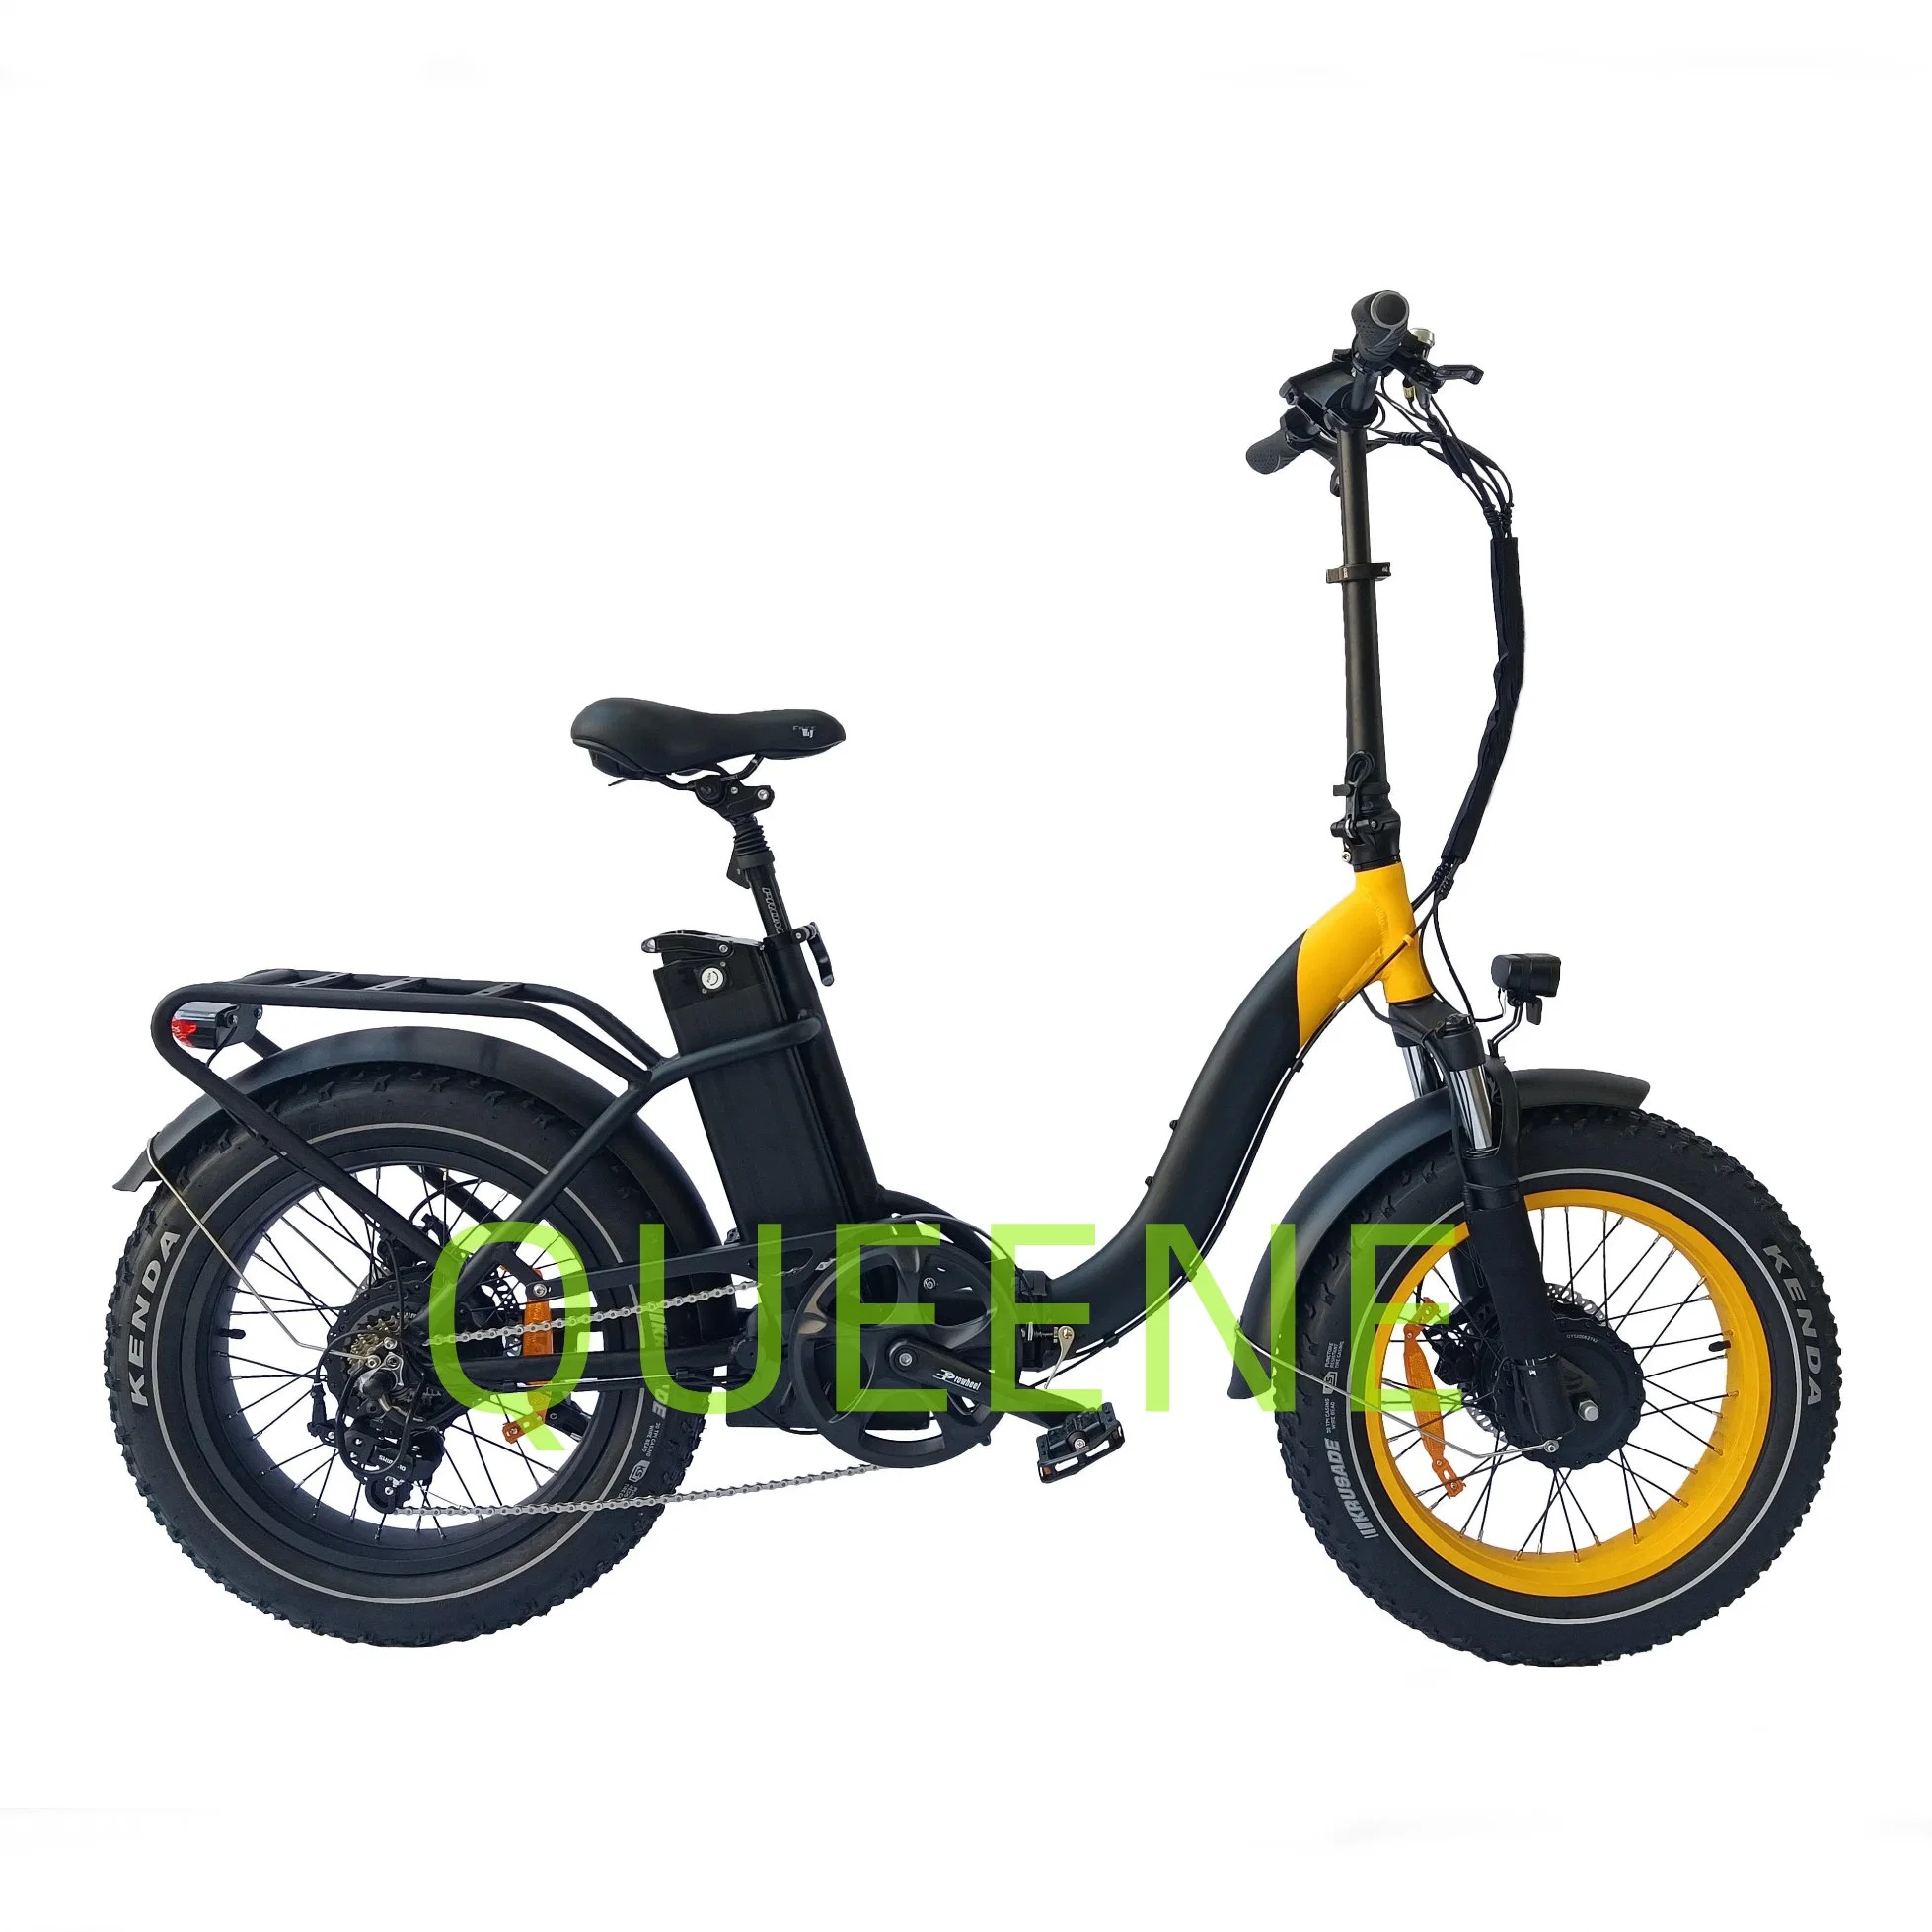 Queene 48V 500W Super Performance Dual Motors Electric Bicycle Mountain Electric Bicycle